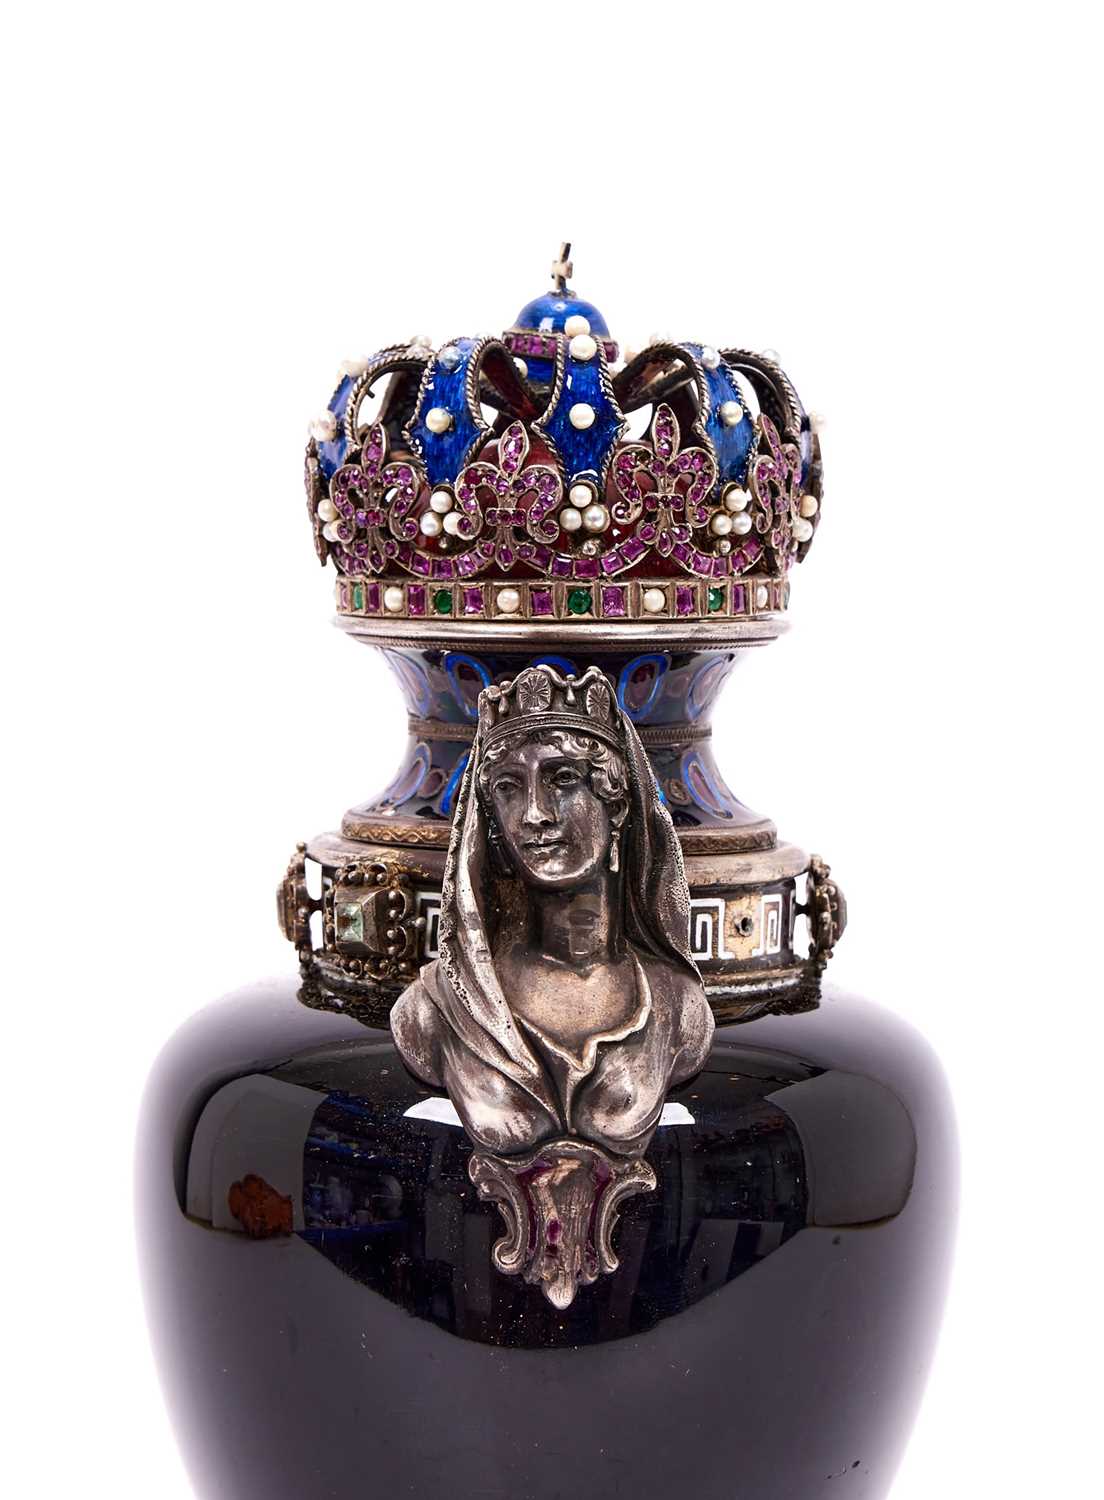 A FINE 19TH CENTURY VIENNESE ENAMEL, SILVER AND JEWELLED URN AND COVER OF ROYAL THEME - Image 10 of 12